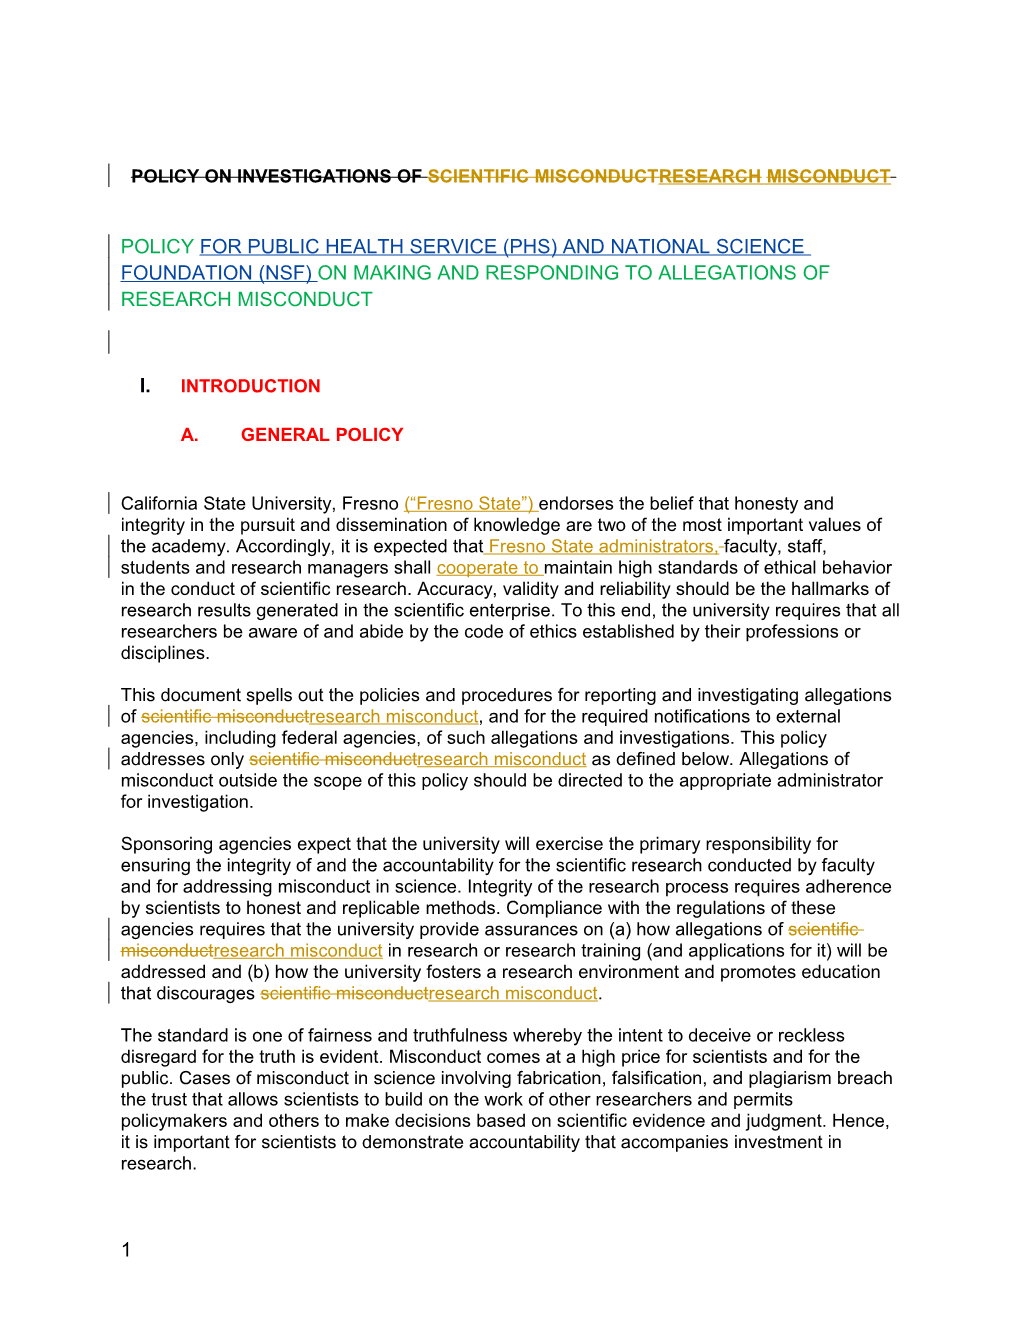 Policy on Investigations of Scientific Misconduct Research Misconduct Gl1